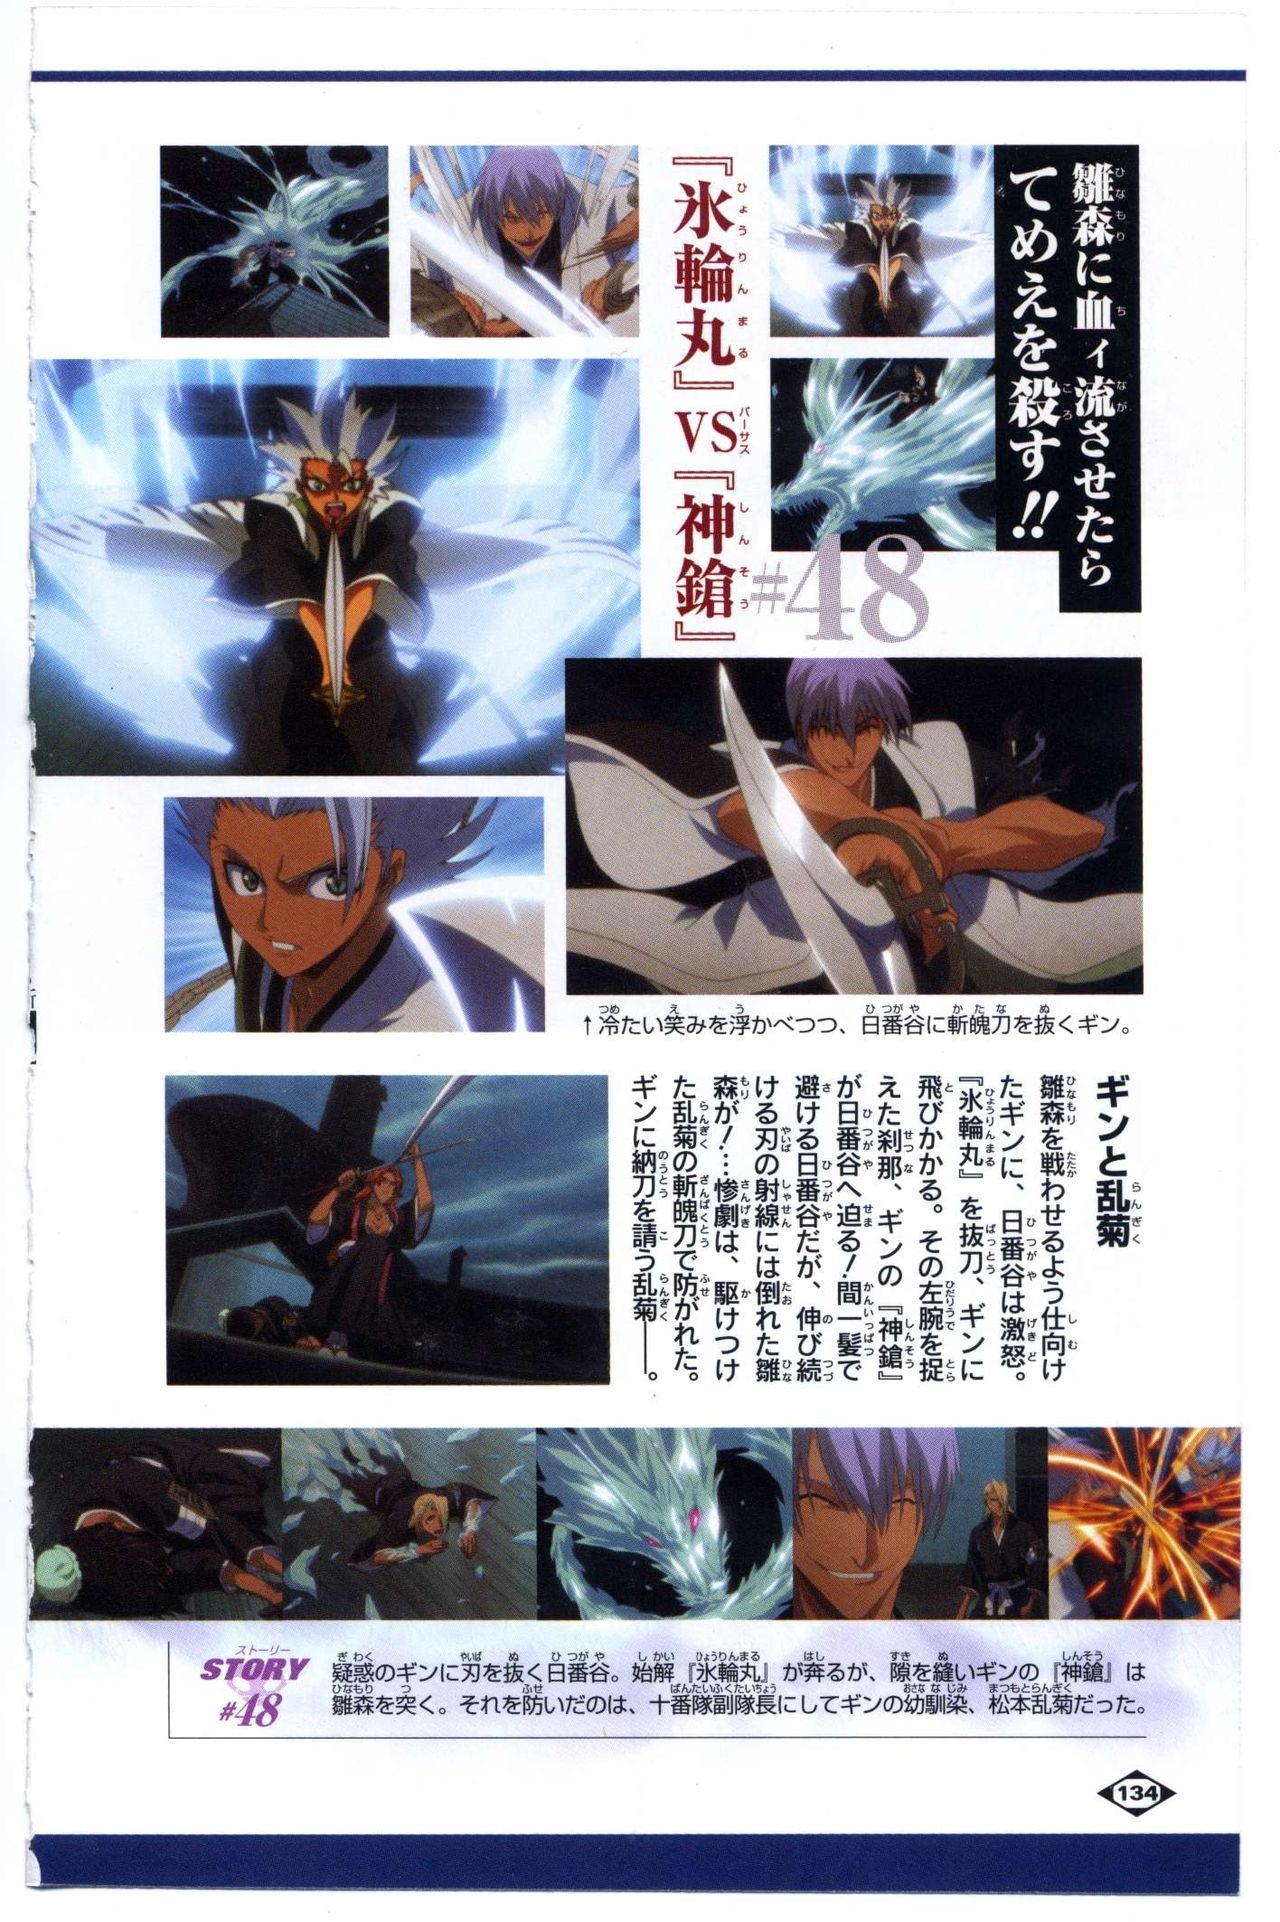 Bleach: Official Animation Book VIBEs 134